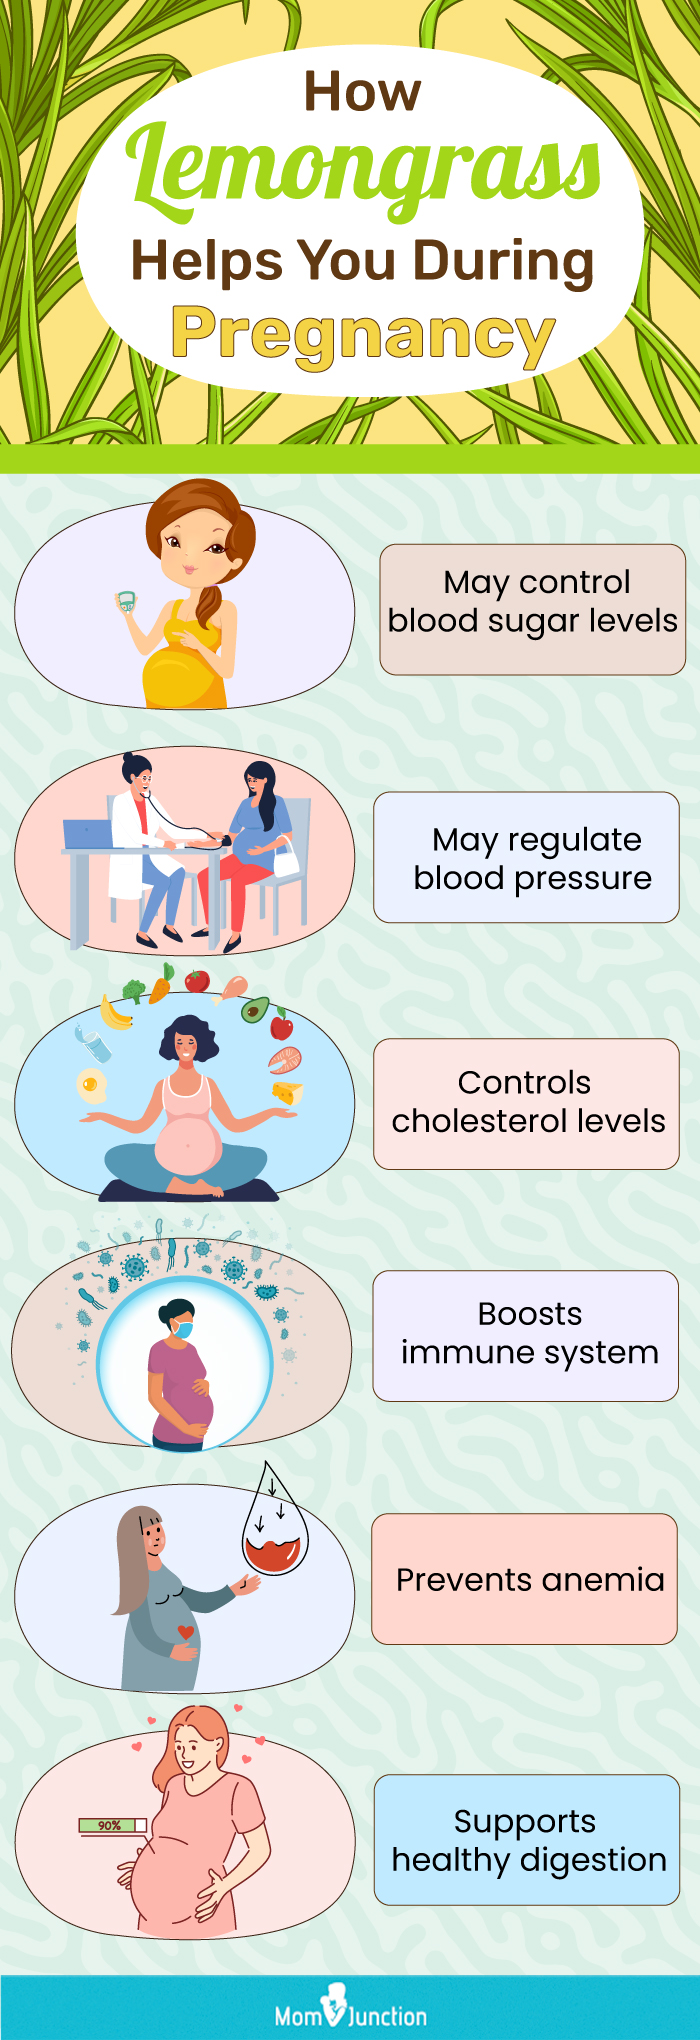 benefits of lemongrass during pregnancy (infographic)